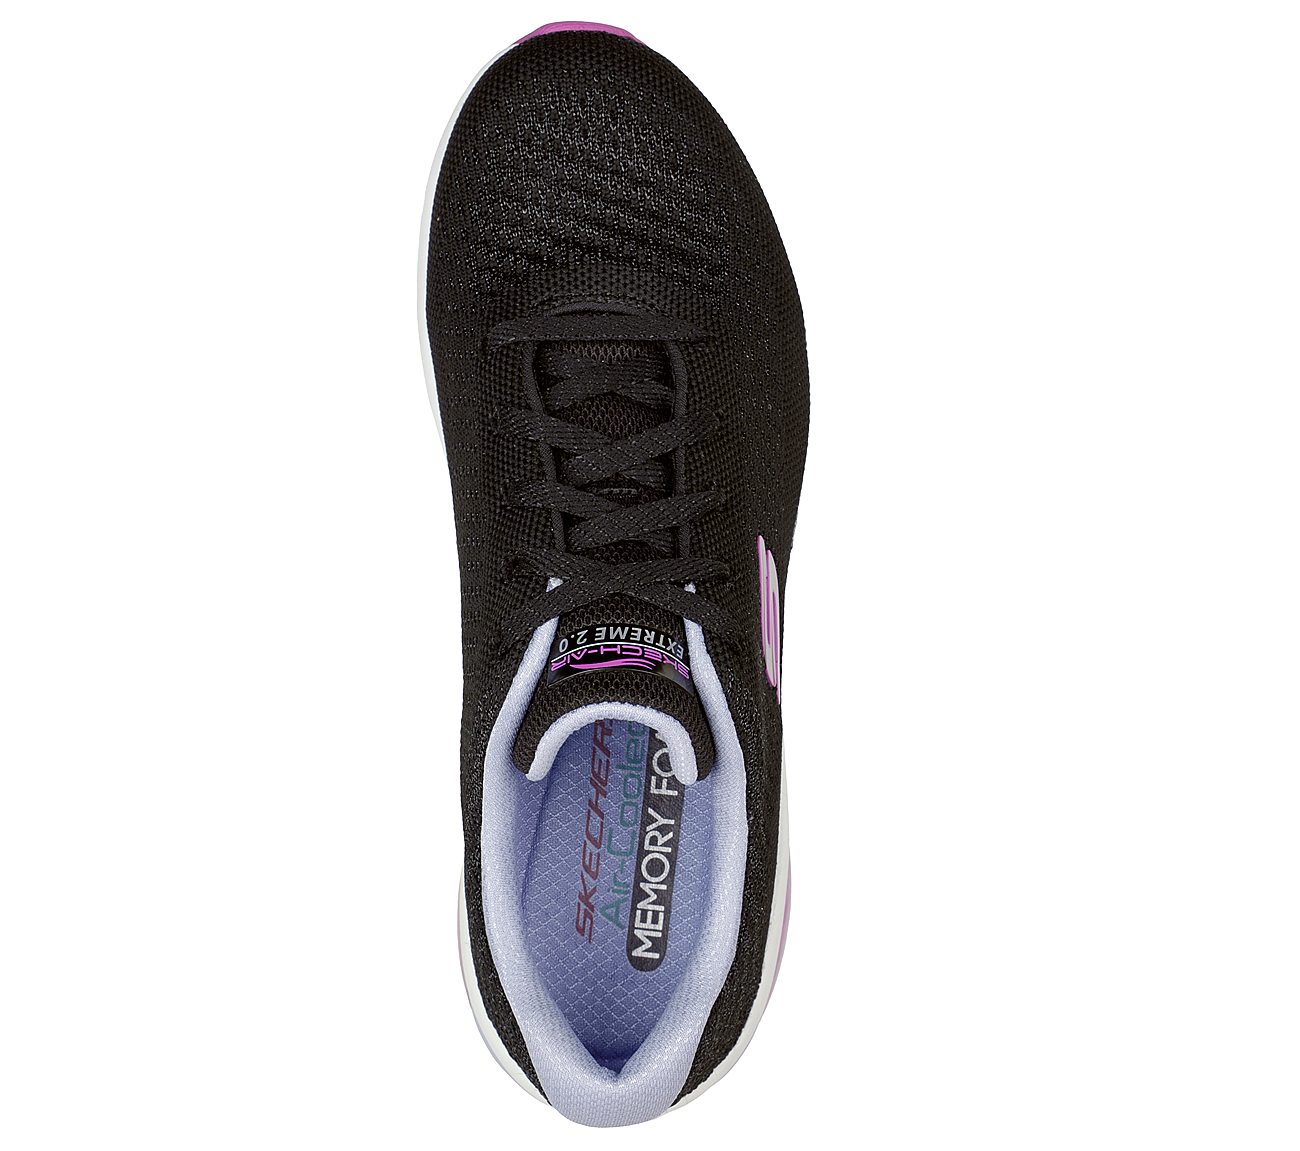 SKECH-AIR EXTREME 2.0-CLASSIC, BLACK/LAVENDER Footwear Top View